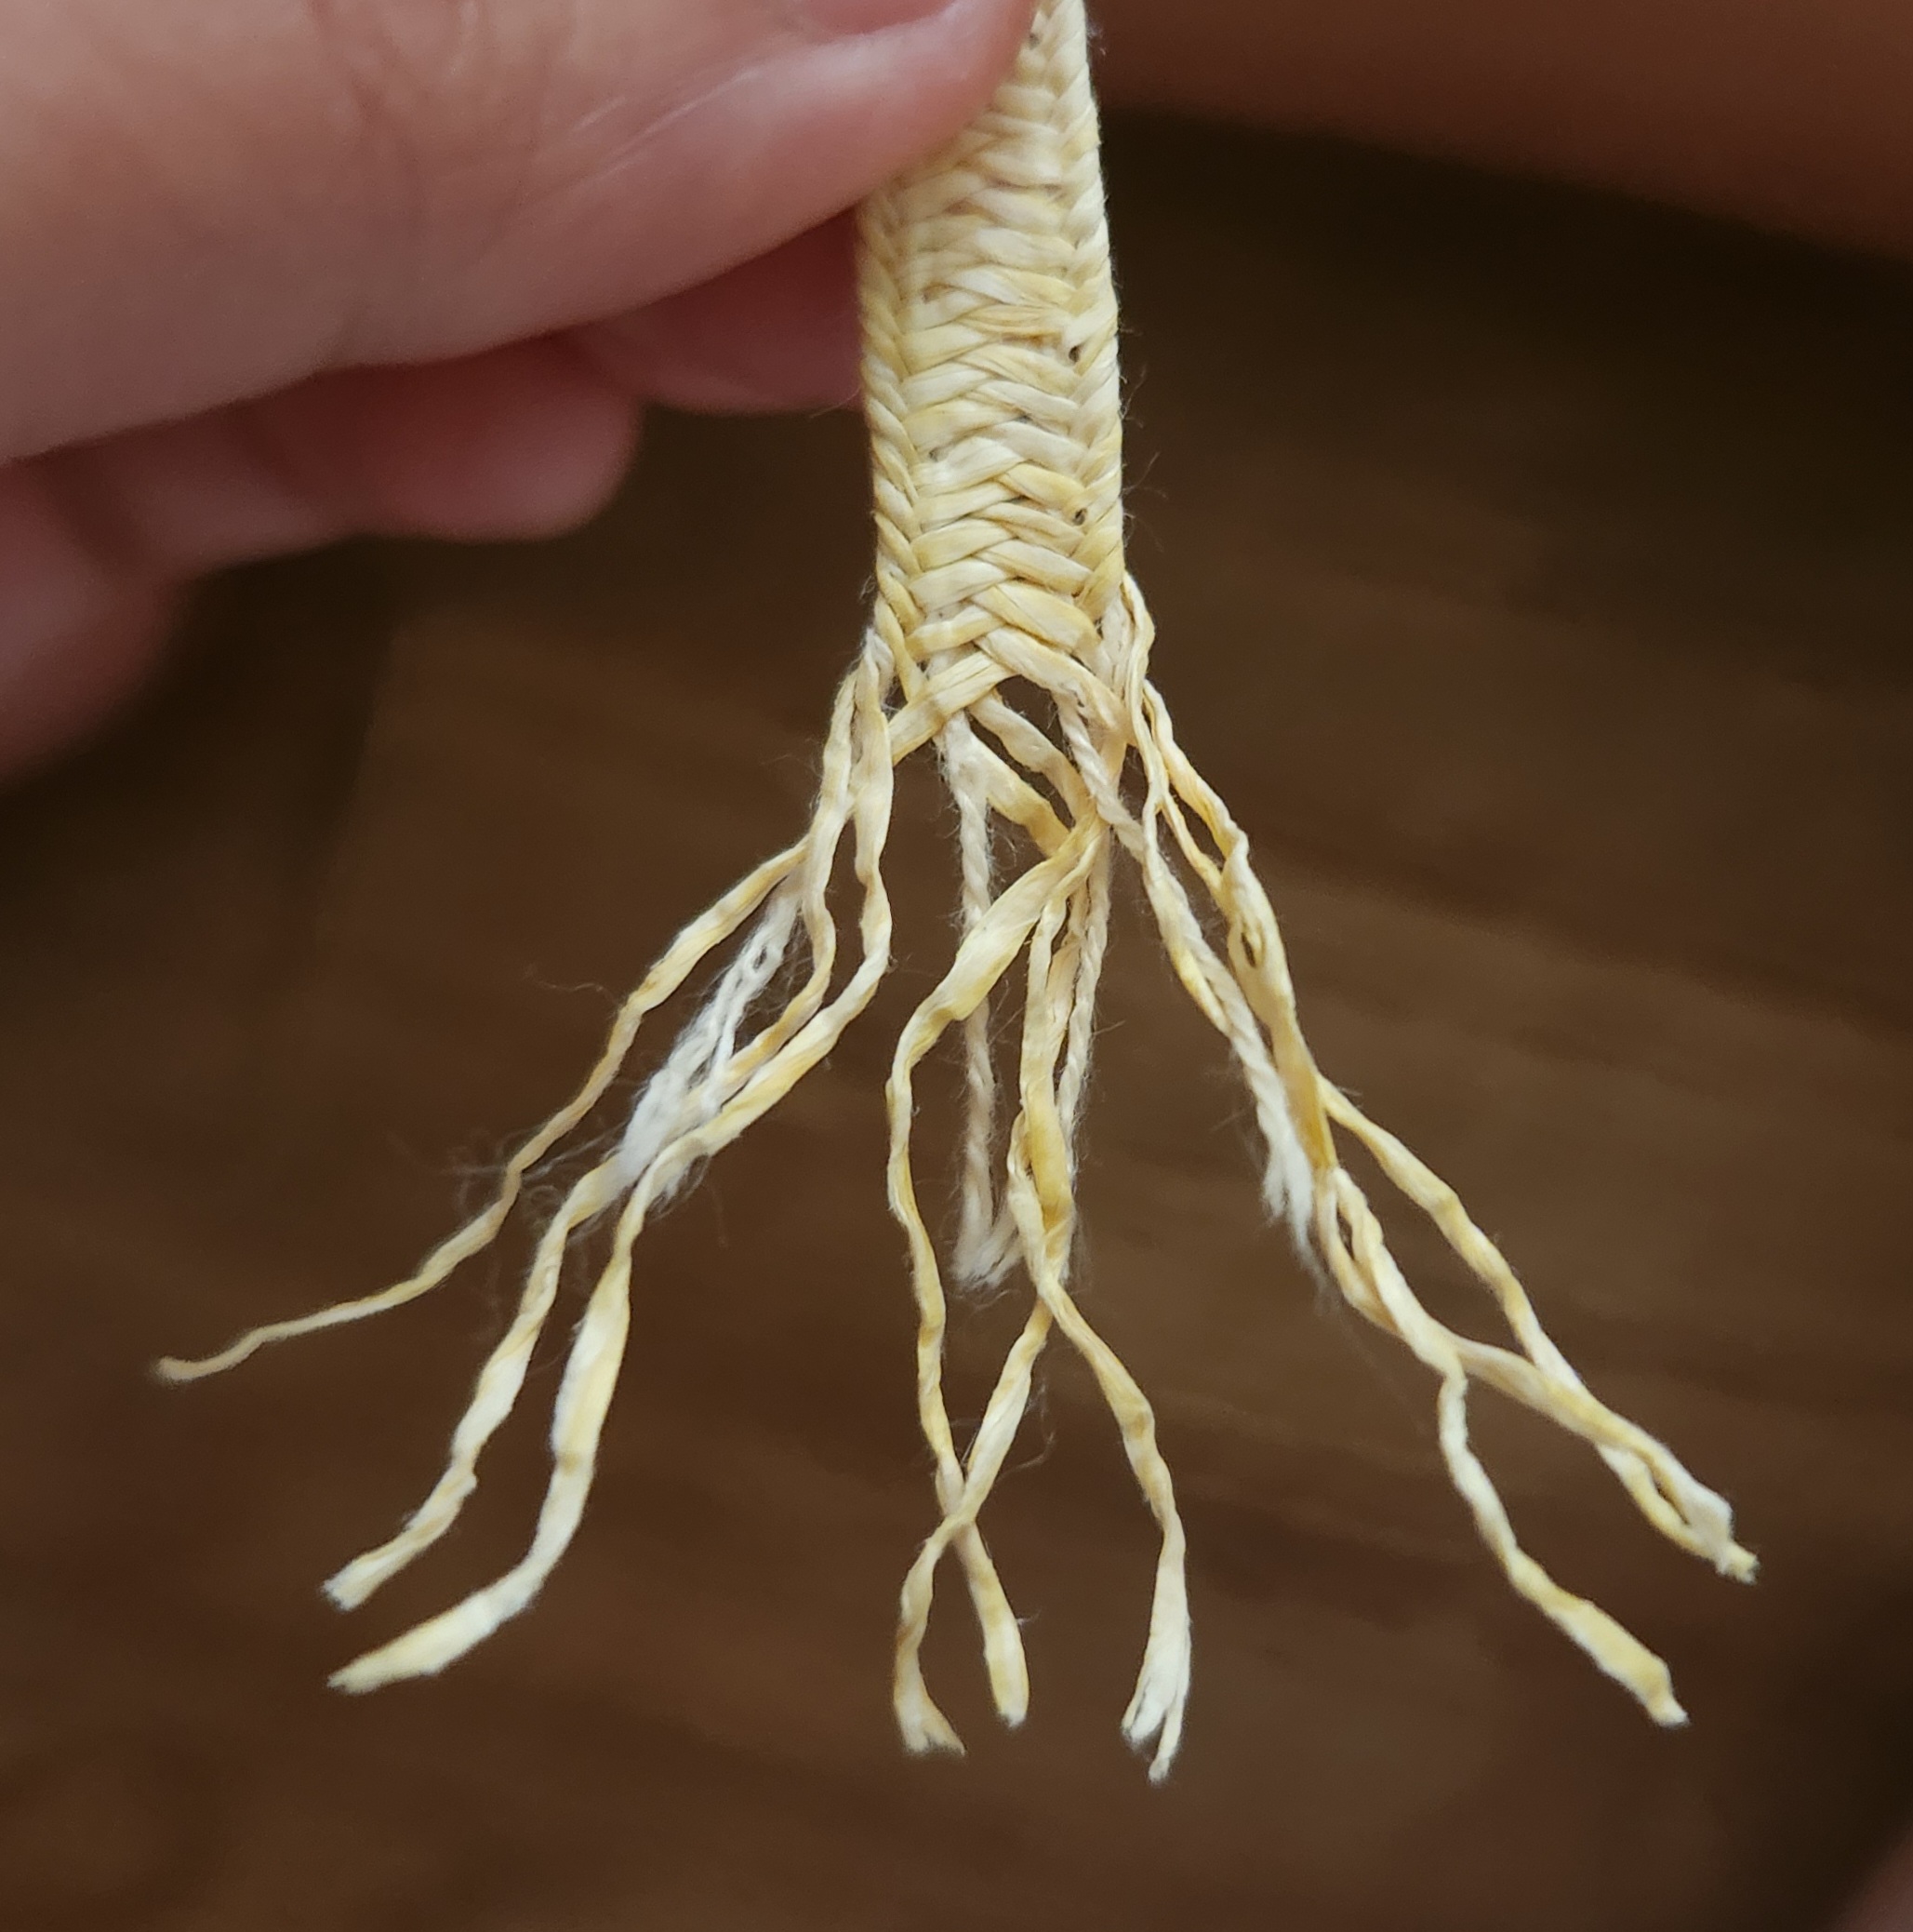 A close-up shot of someone’s hand holding a braided straw ribbon.